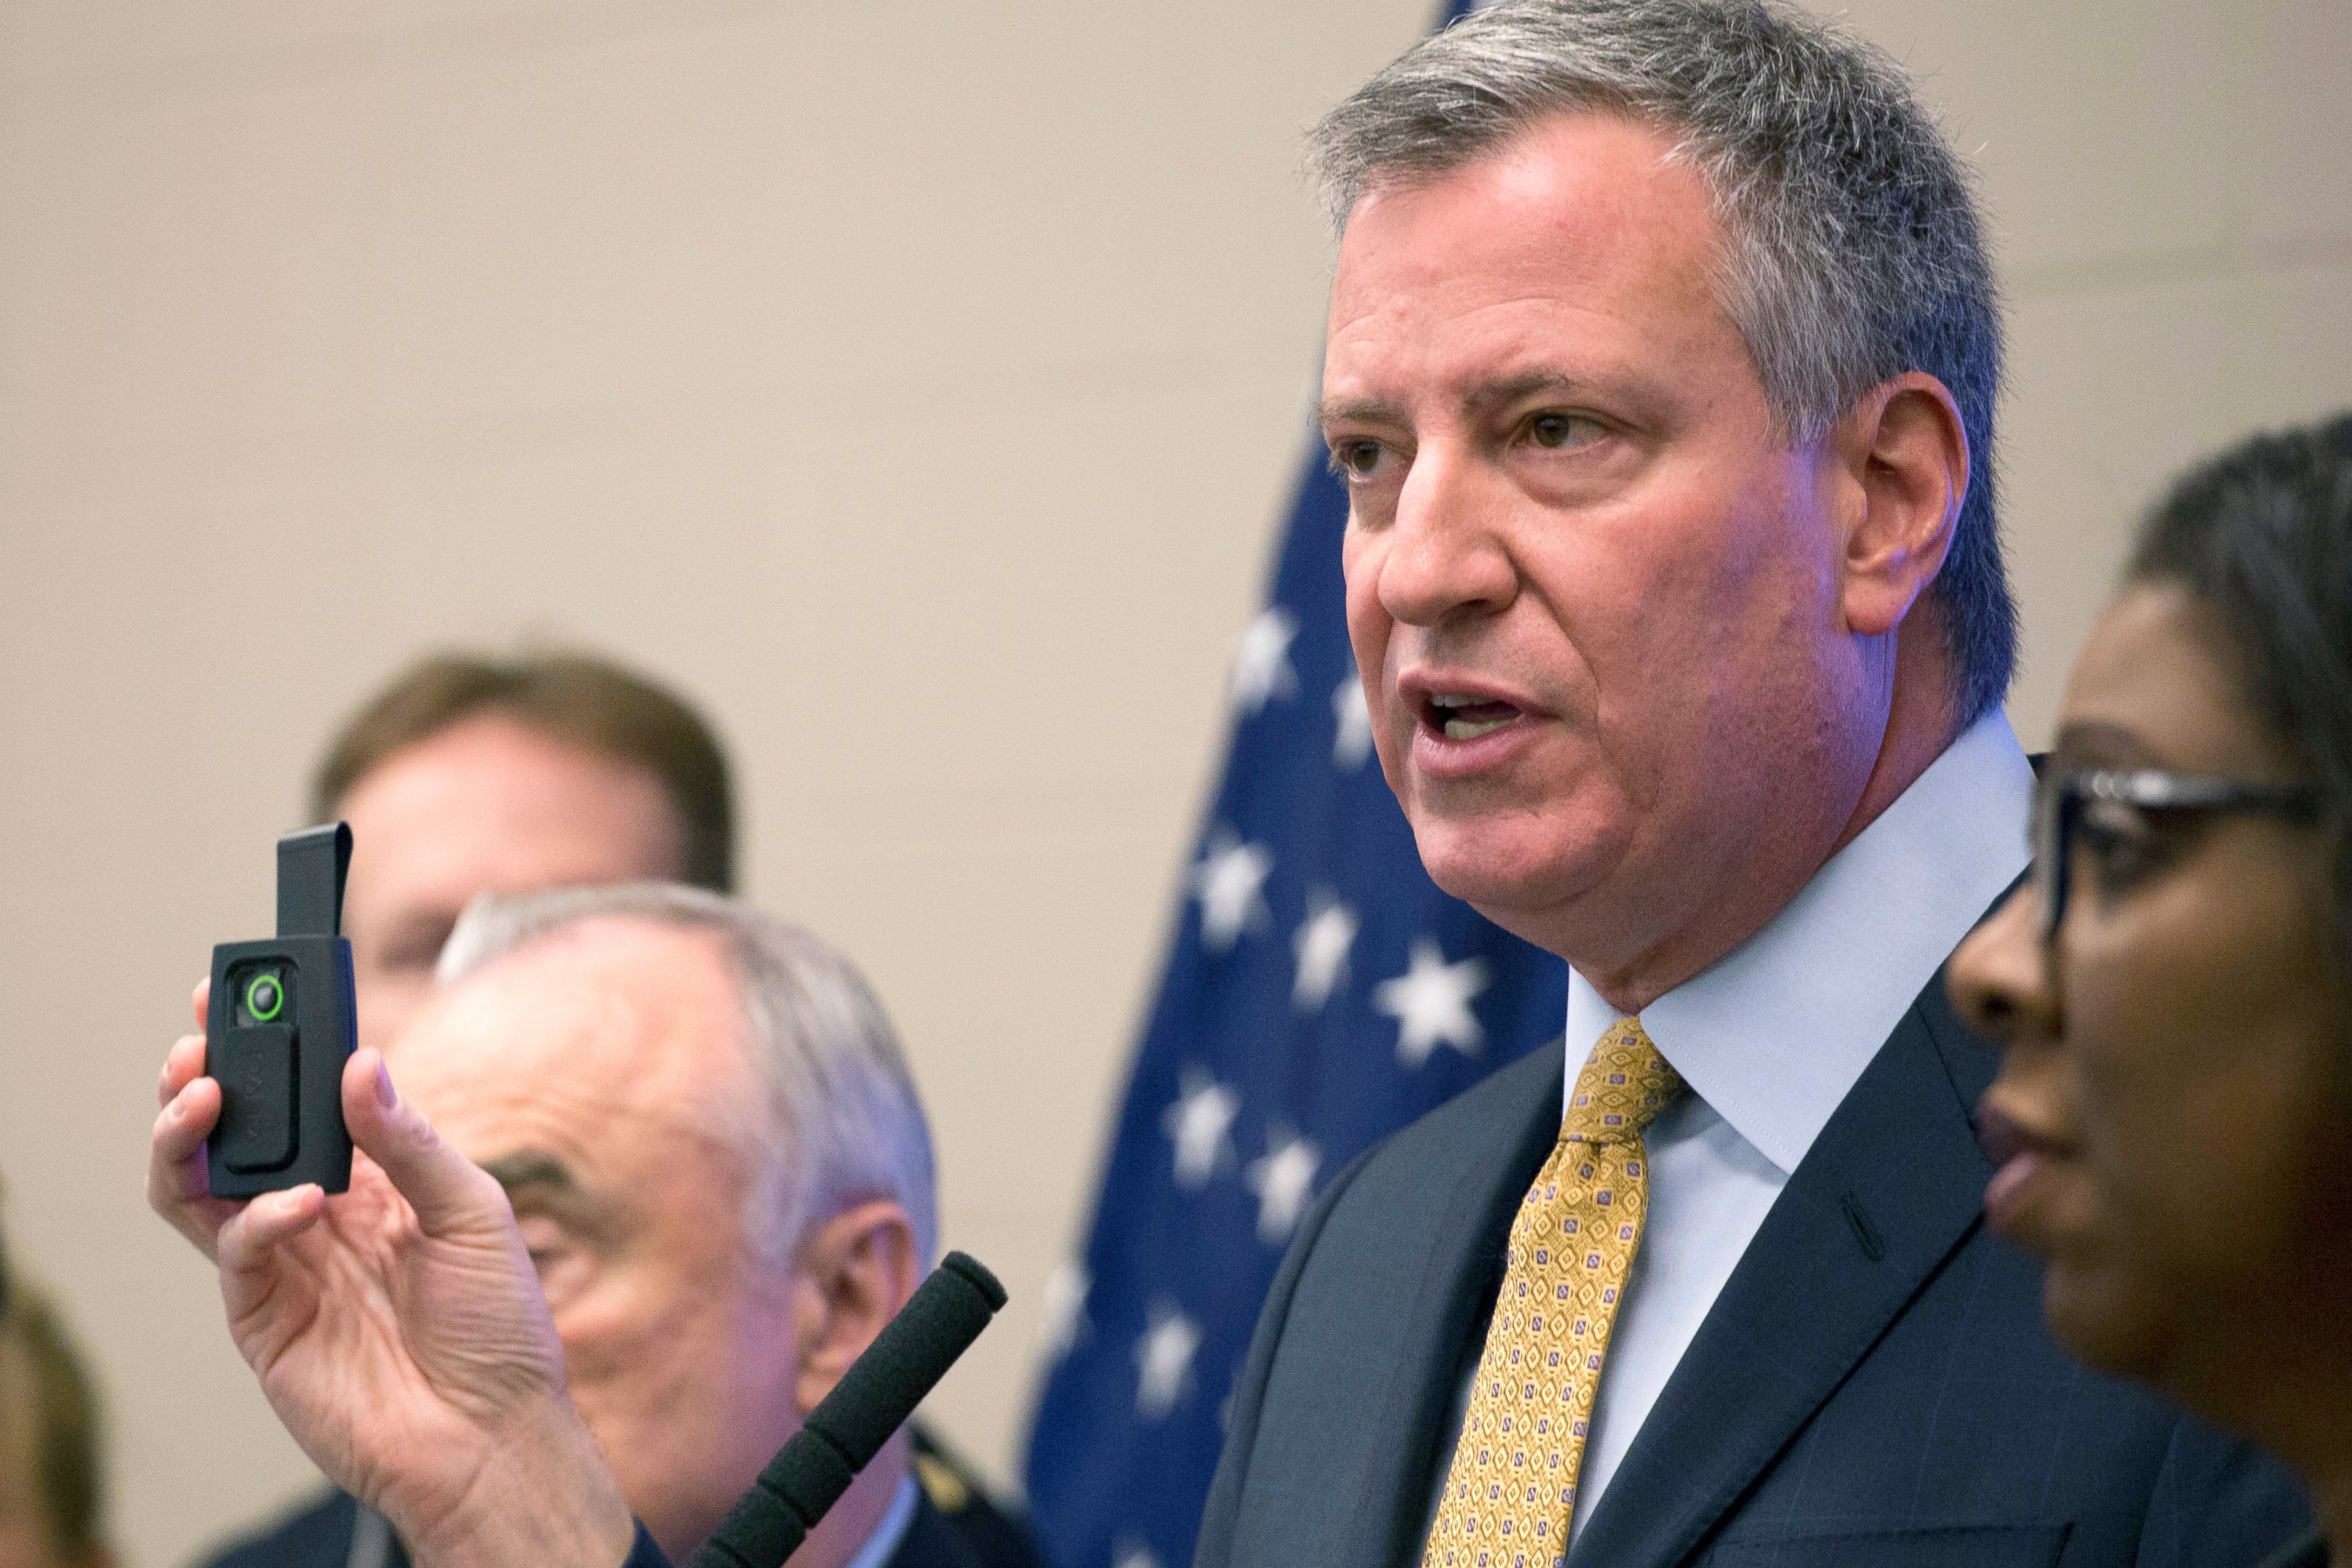 PHOTO: New York Mayor Bill de Blasio holds a body camera during a news conference to discuss a pilot program for the use of body cameras for some police officers, at the Police Academy in Queens, Dec. 3, 2014.